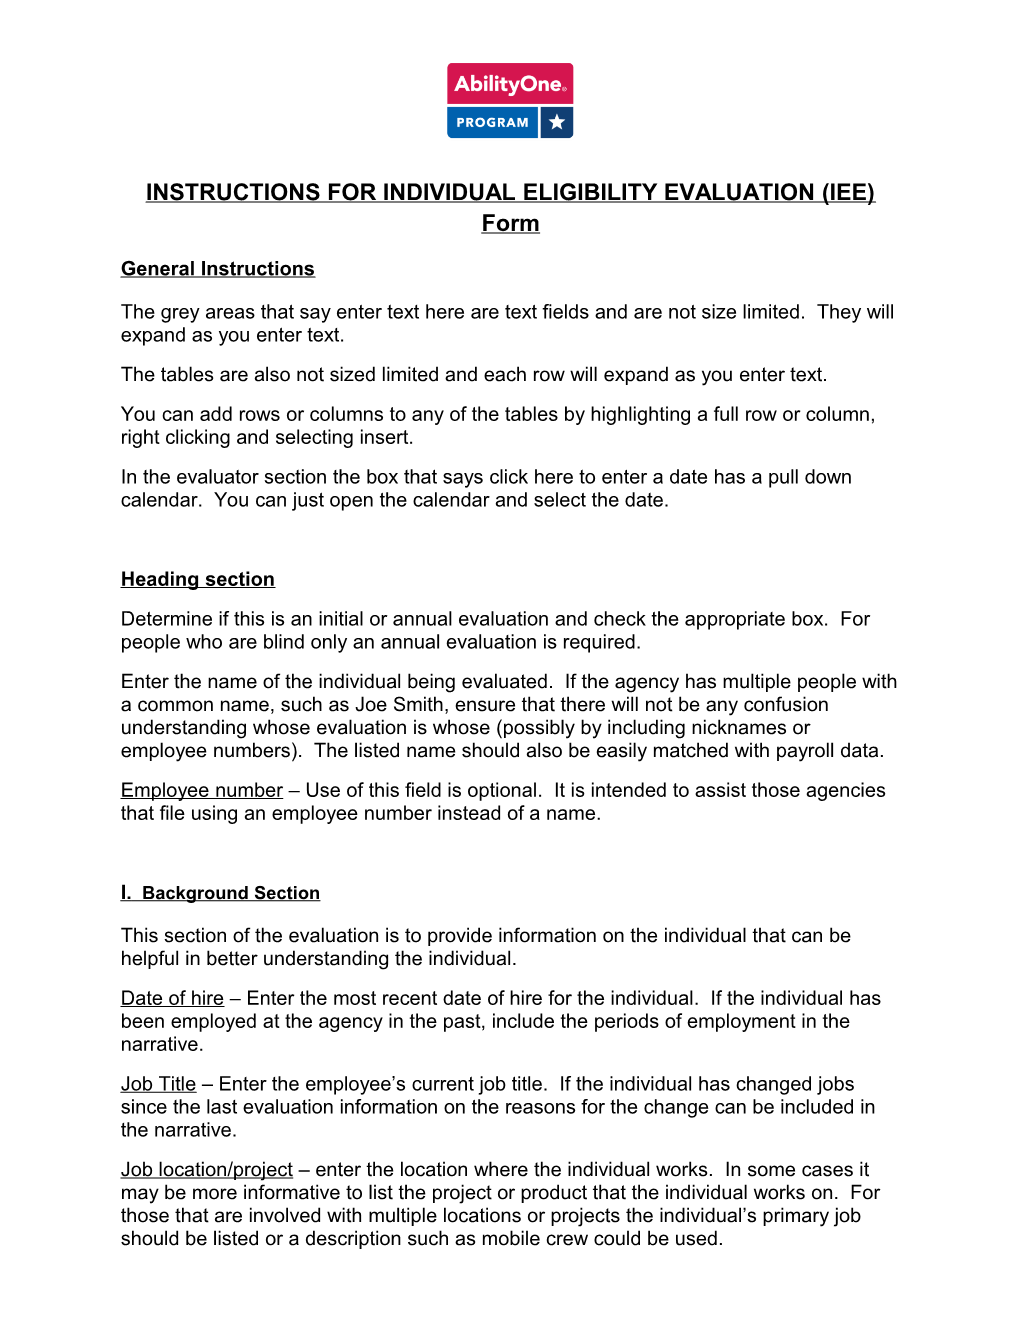 INSTRUCTIONS for INDIVIDUAL ELIGIBILITY EVALUATION (IEE) Form